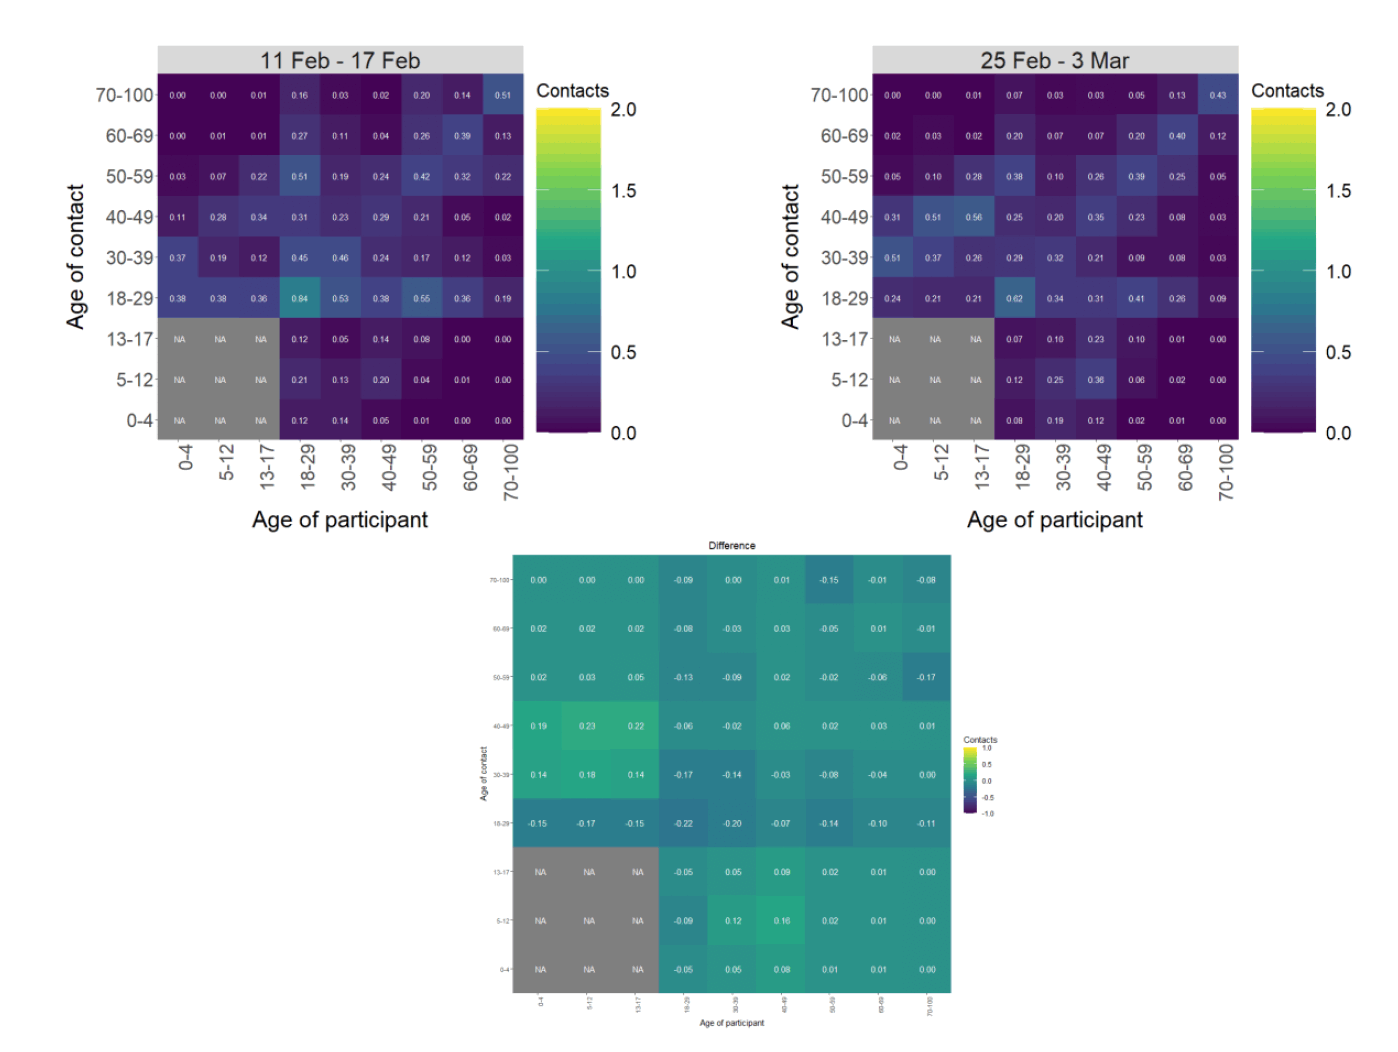 Figure 5. Heat maps showing the mean contacts by age group in the weeks of 11-17 Feb and 25 Feb-3 Mar.